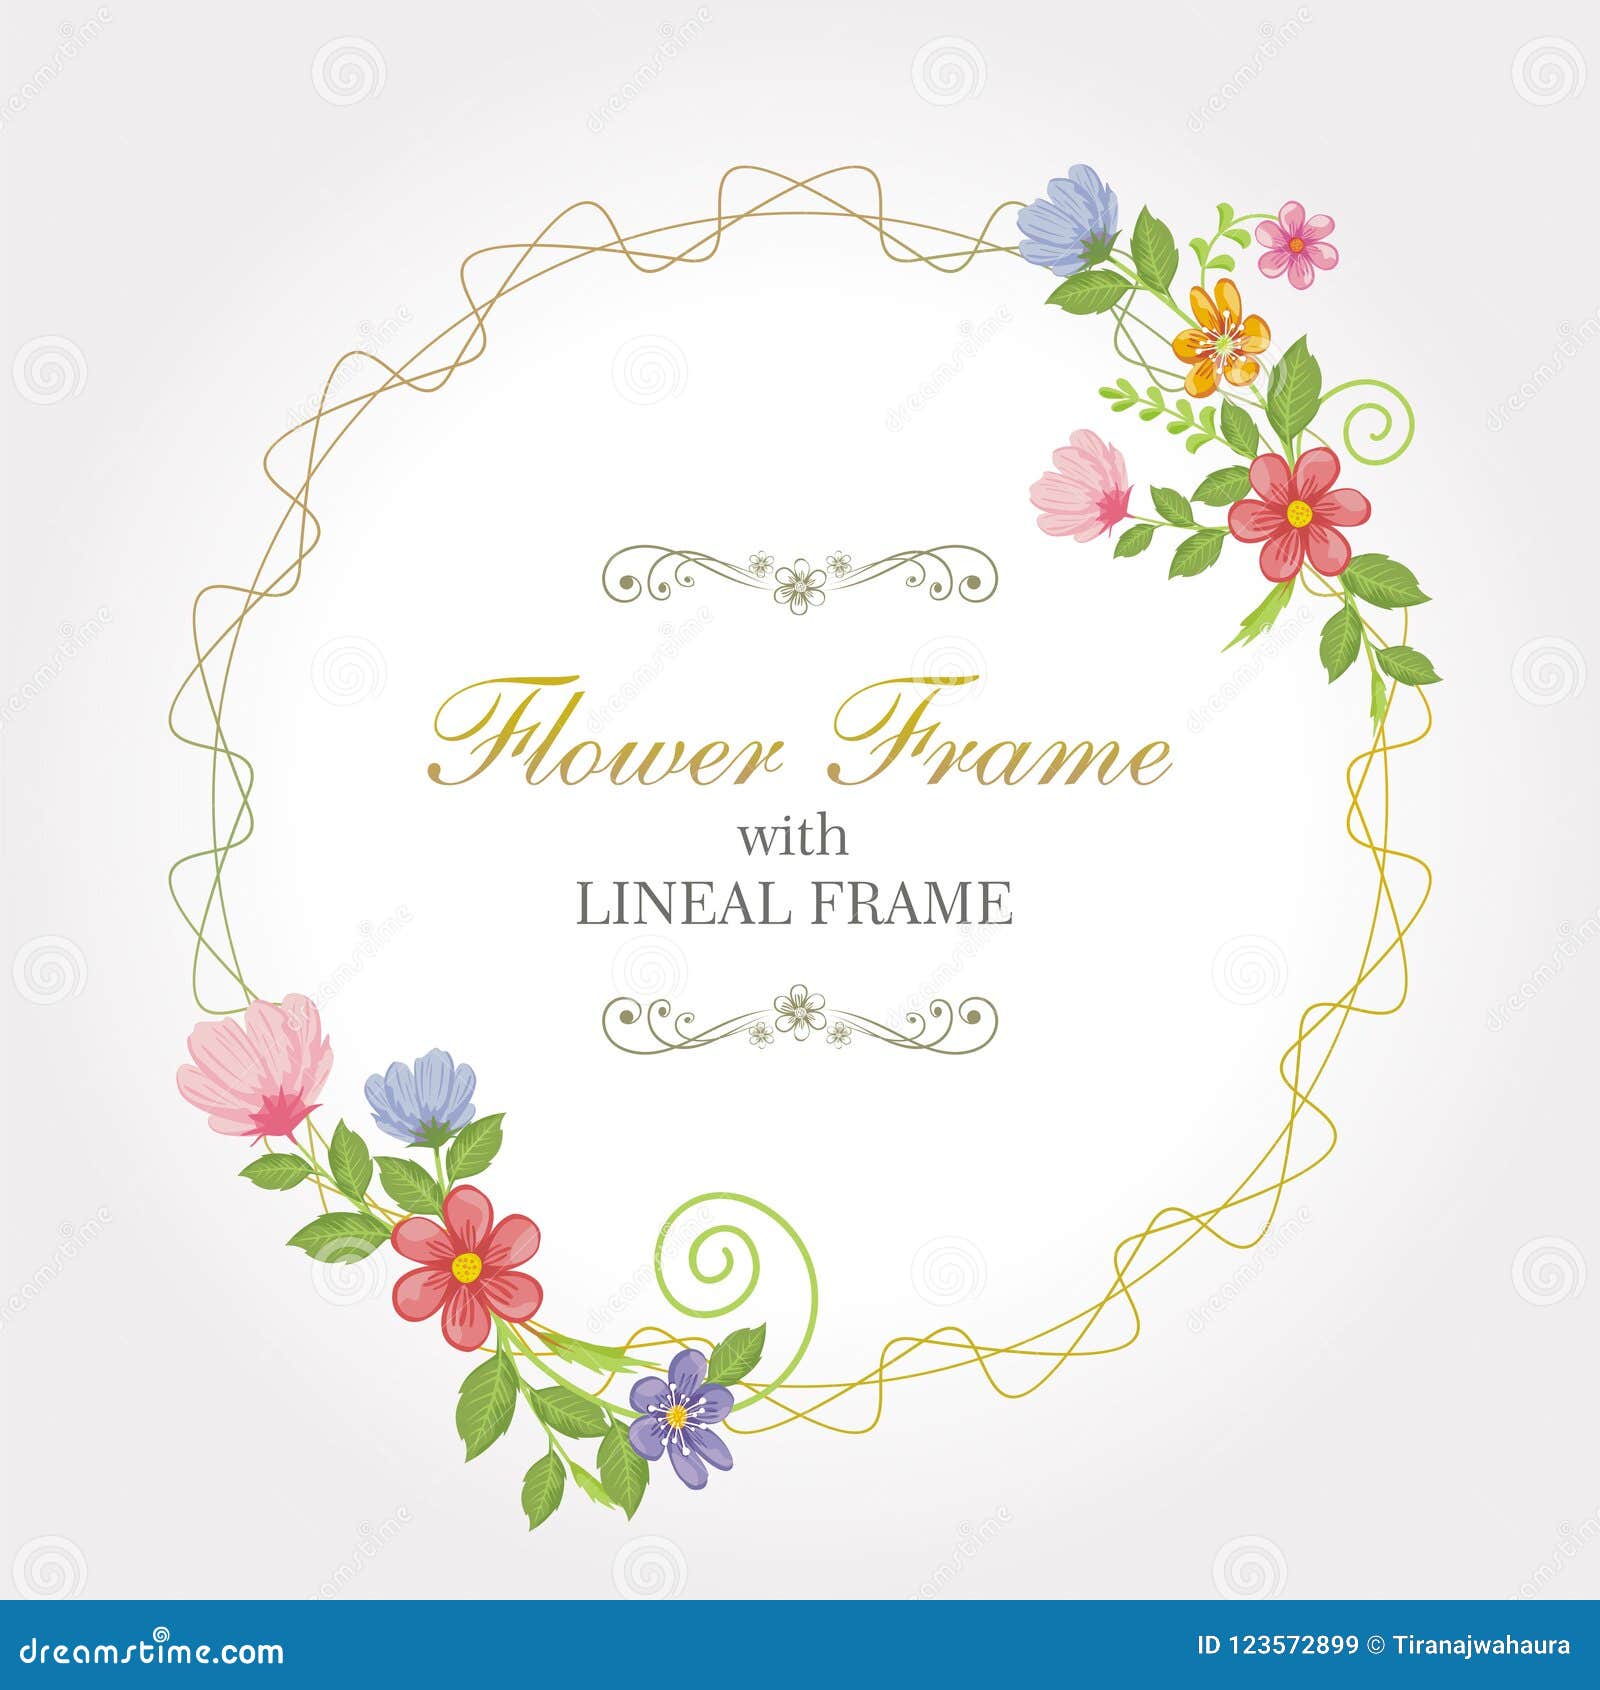 floral frame with golden lineal  